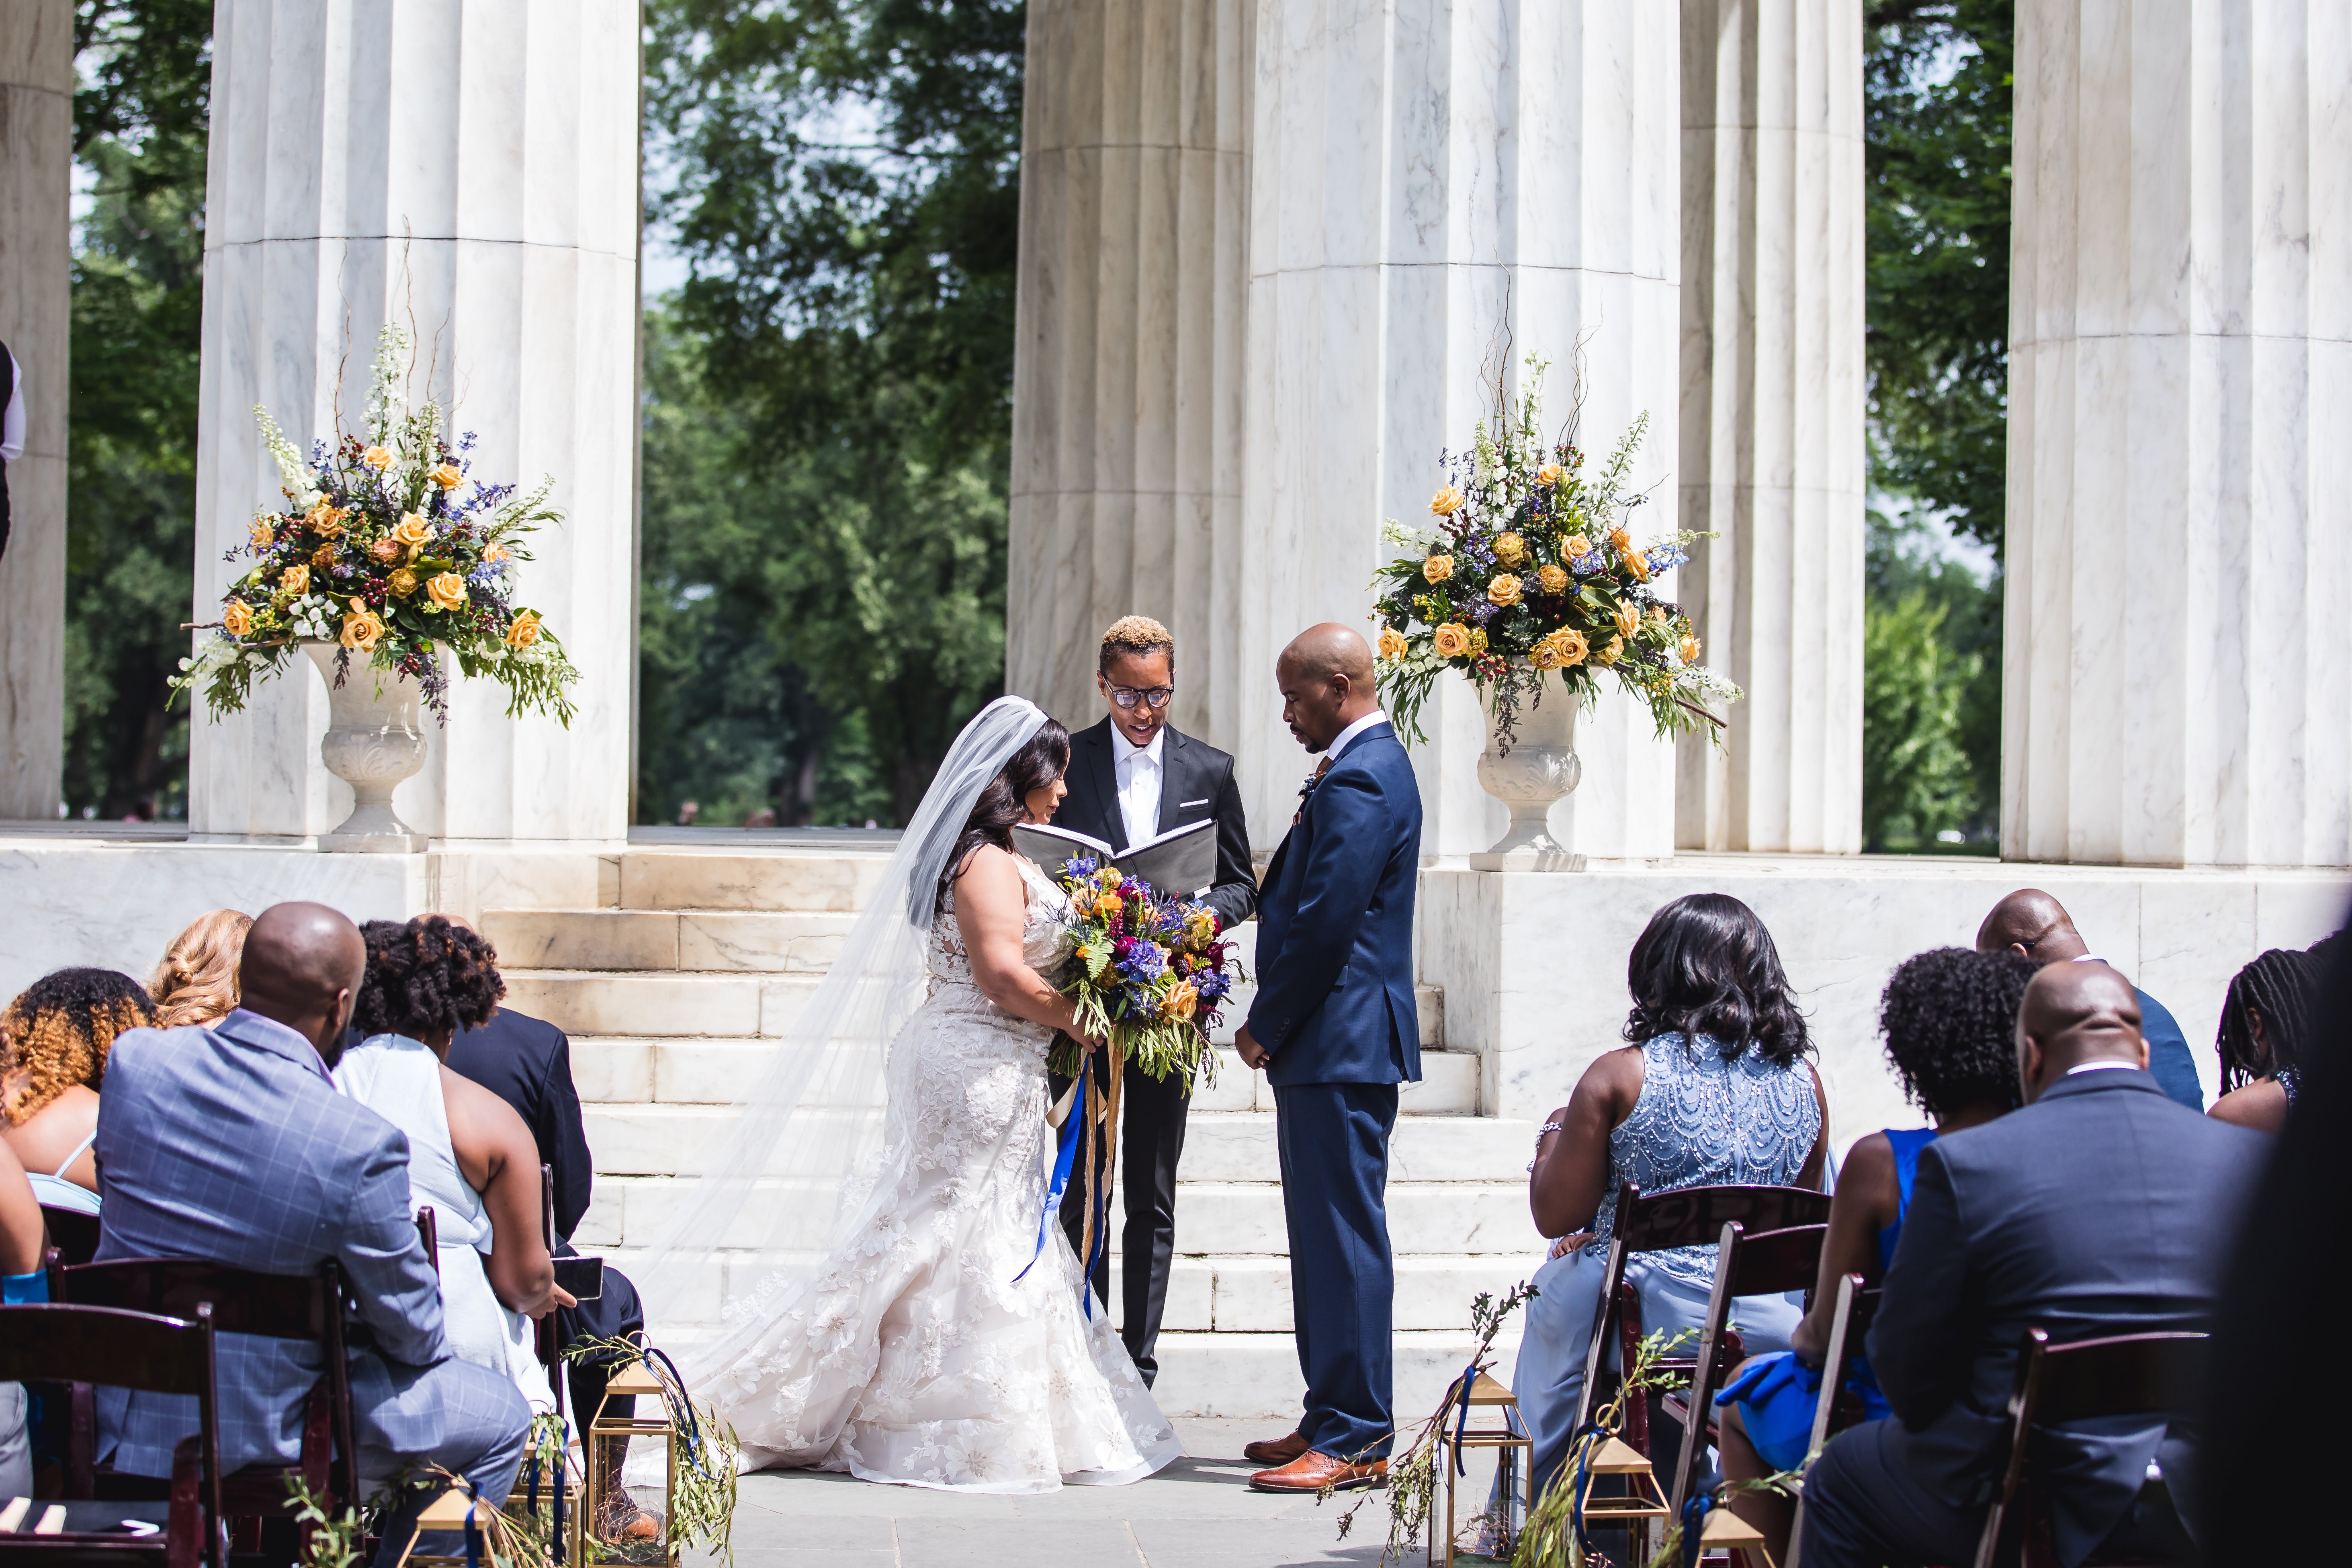 Bridal Bliss: Miya and Brandon's Washington, D.C. Wedding Was Intimate And Filled With Love